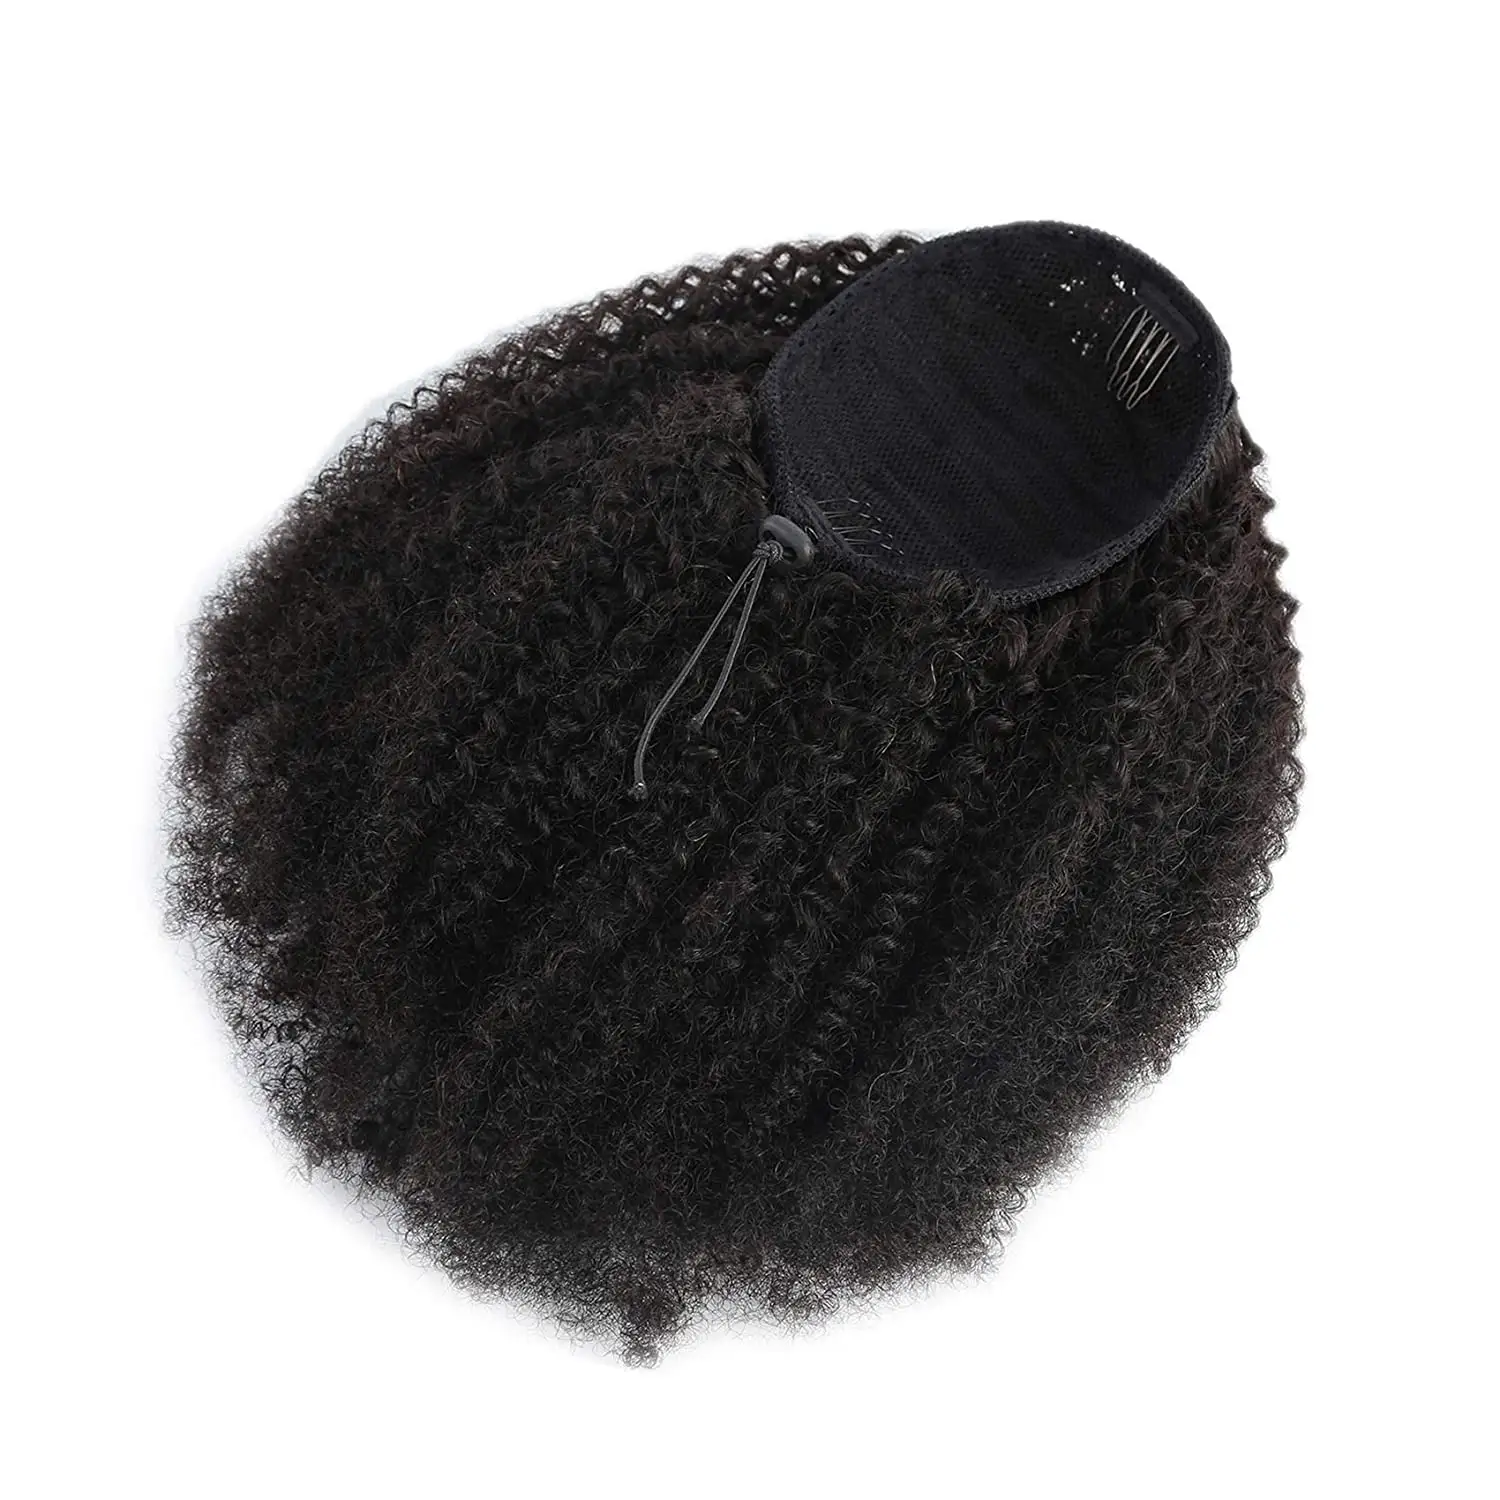 2020 New style 100g no smell no shedding black wigs clip ins bundles kinky curly